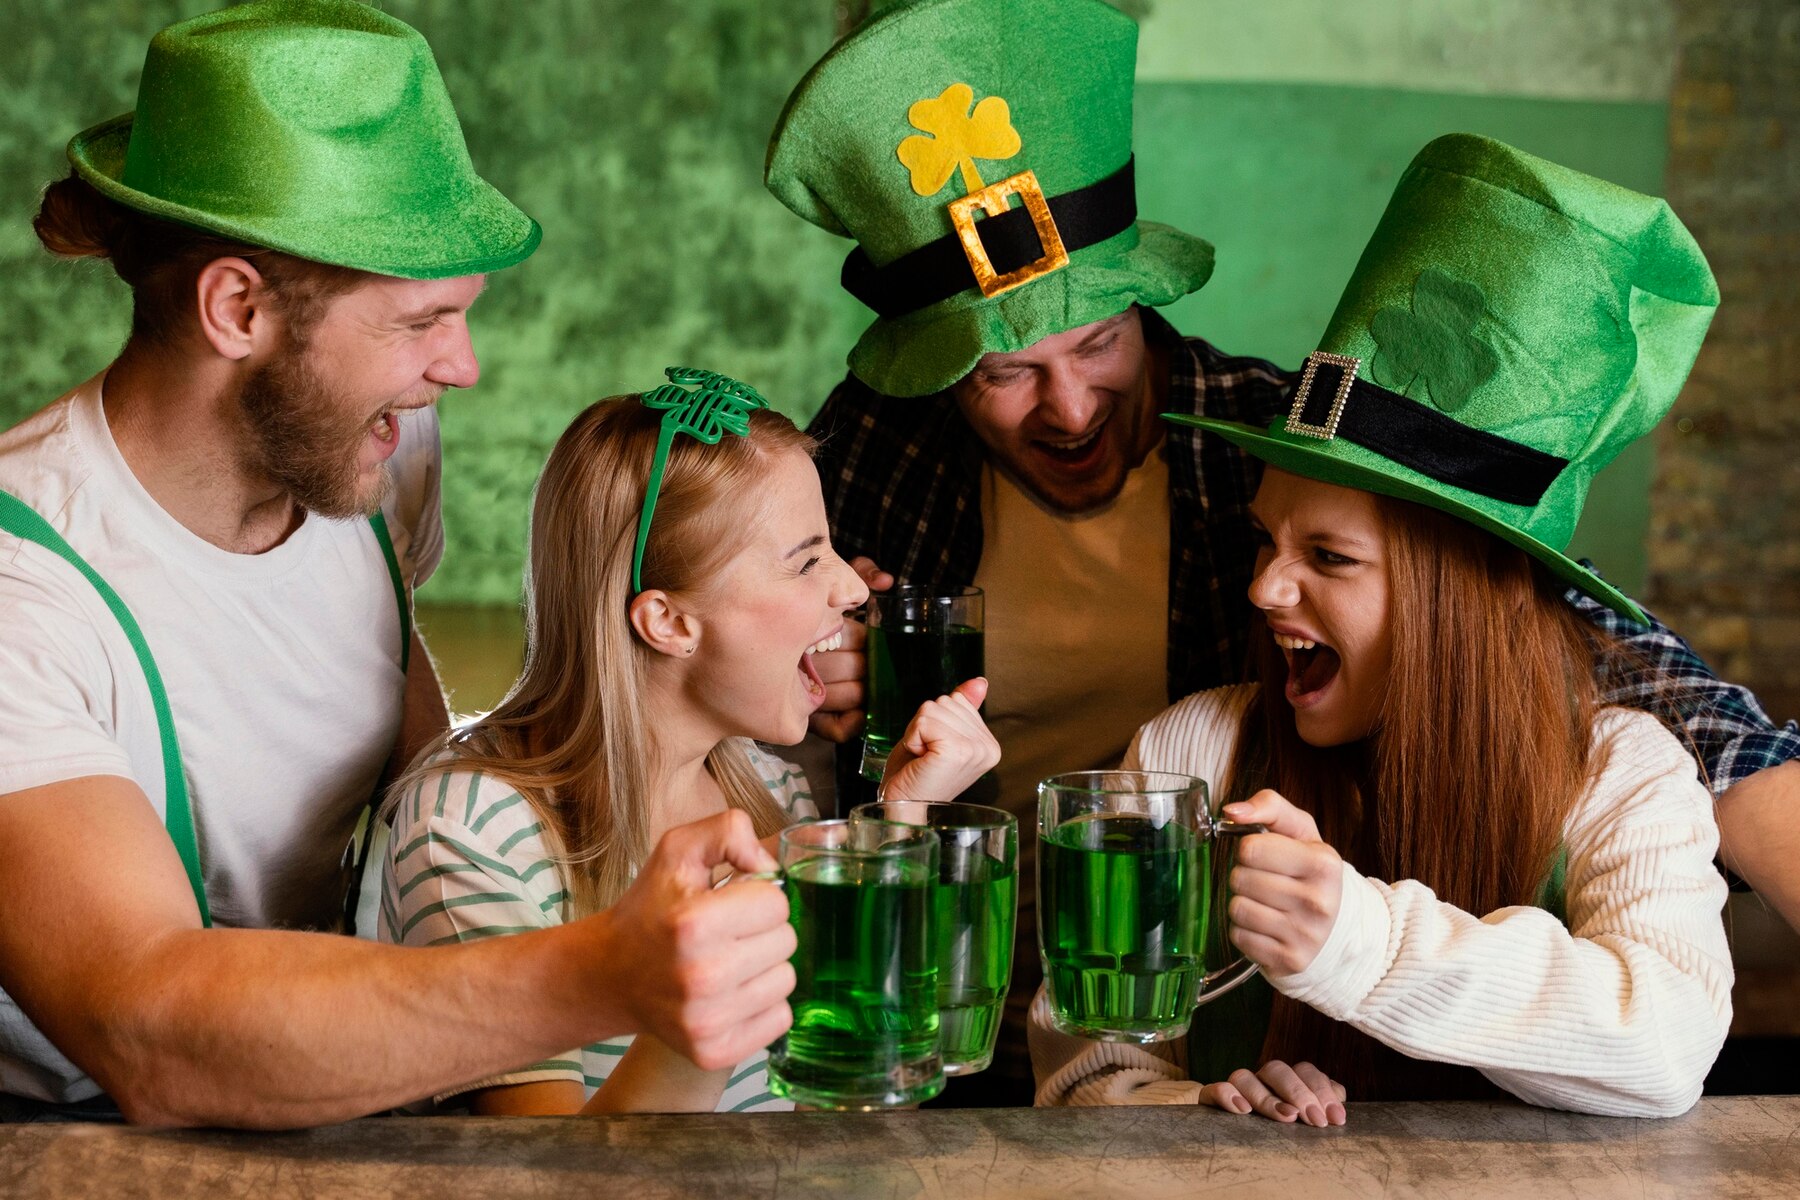 What Is St Patrick's Day?